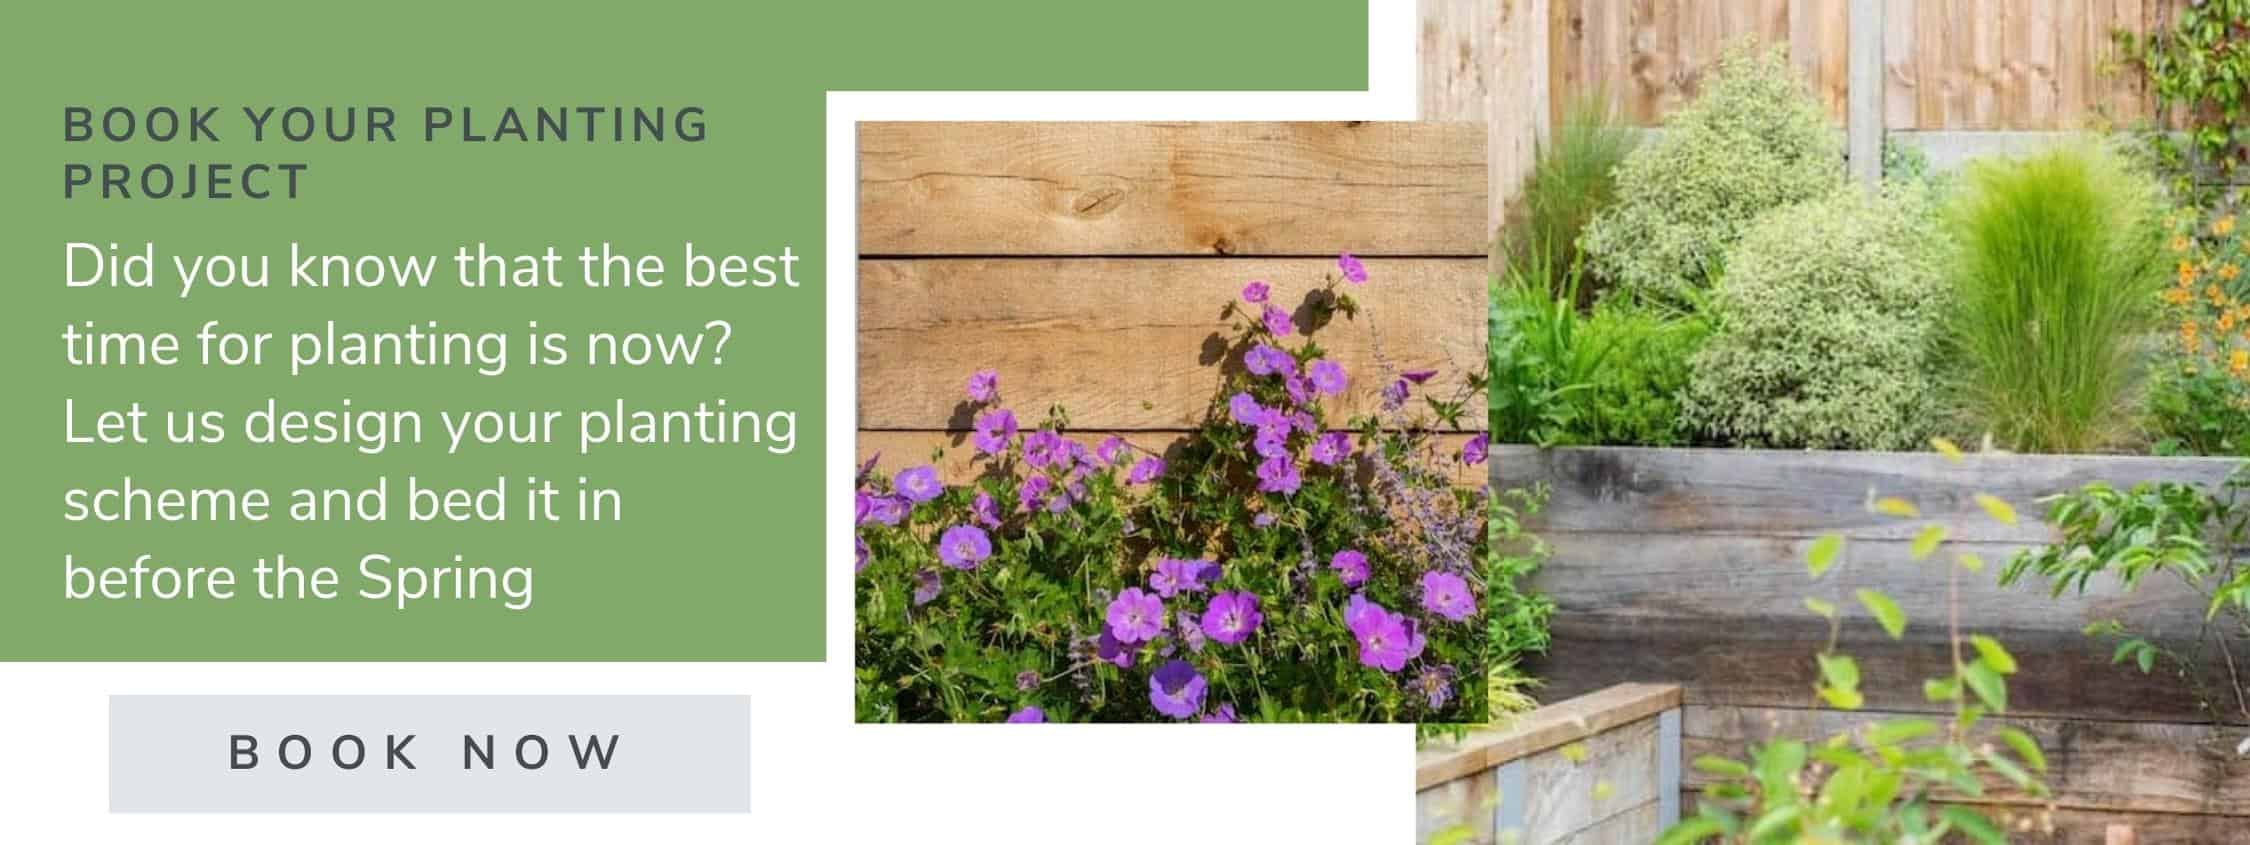 book your planting design project now